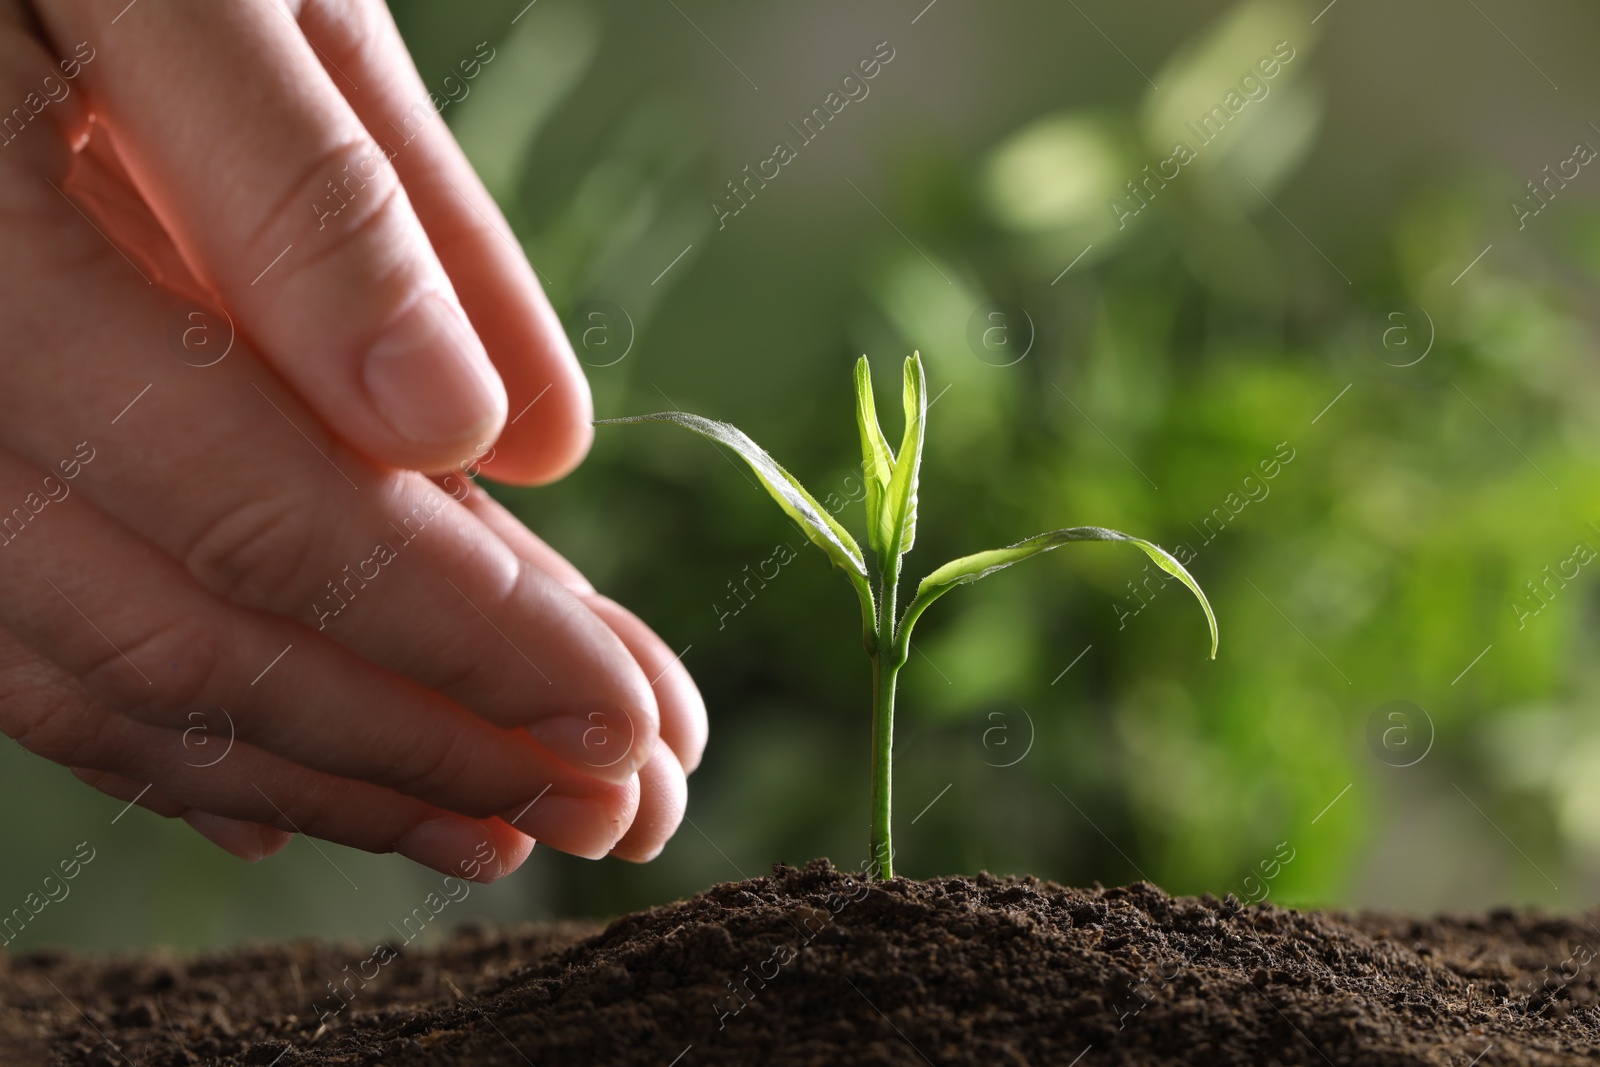 Photo of Woman protecting young green seedling in soil against blurred background, closeup